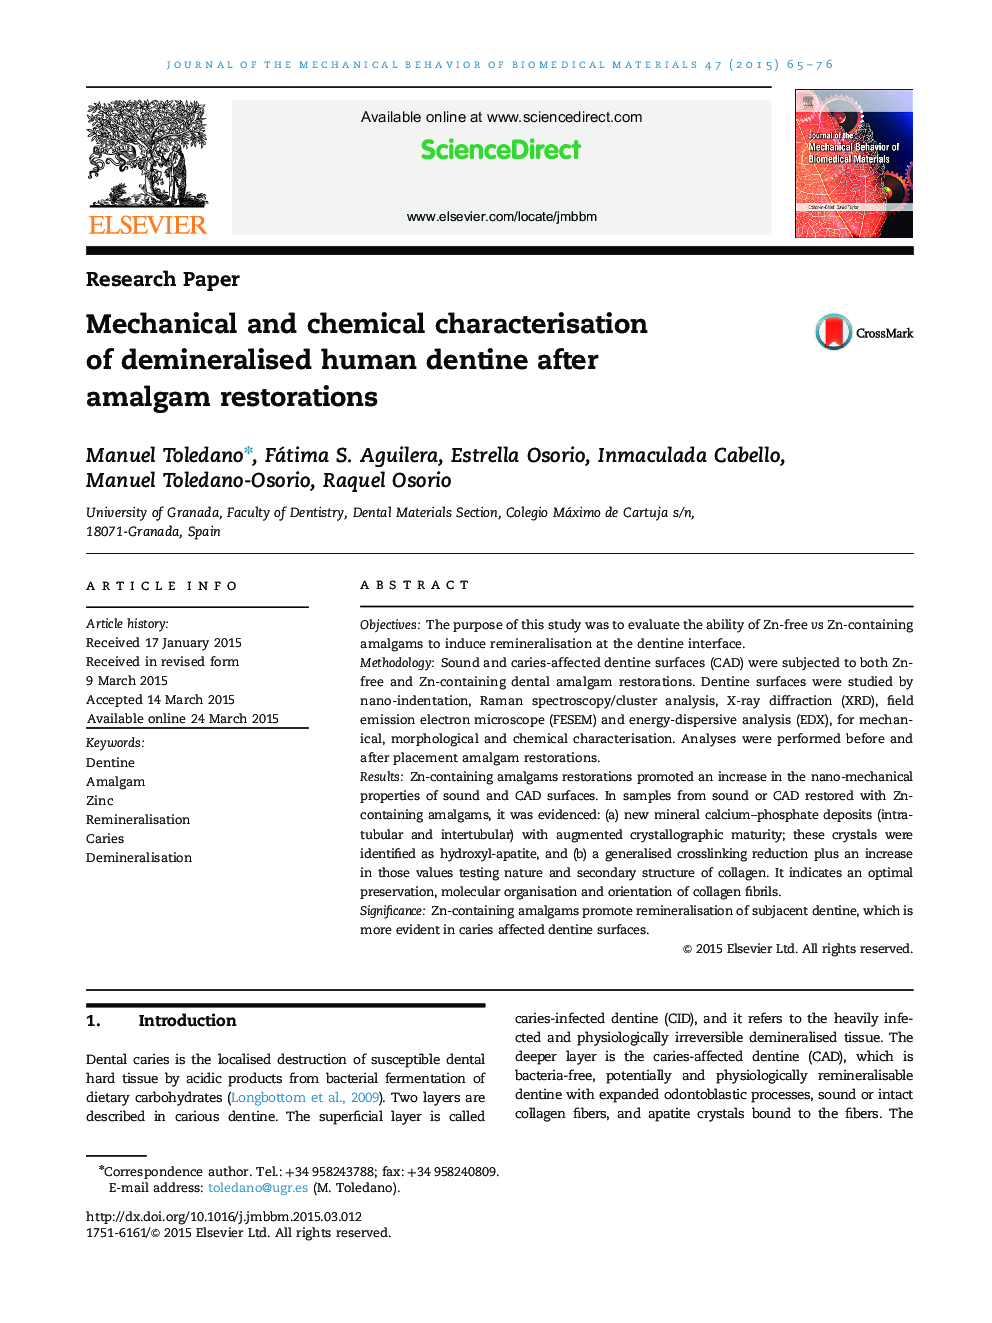 Mechanical and chemical characterisation of demineralised human dentine after amalgam restorations